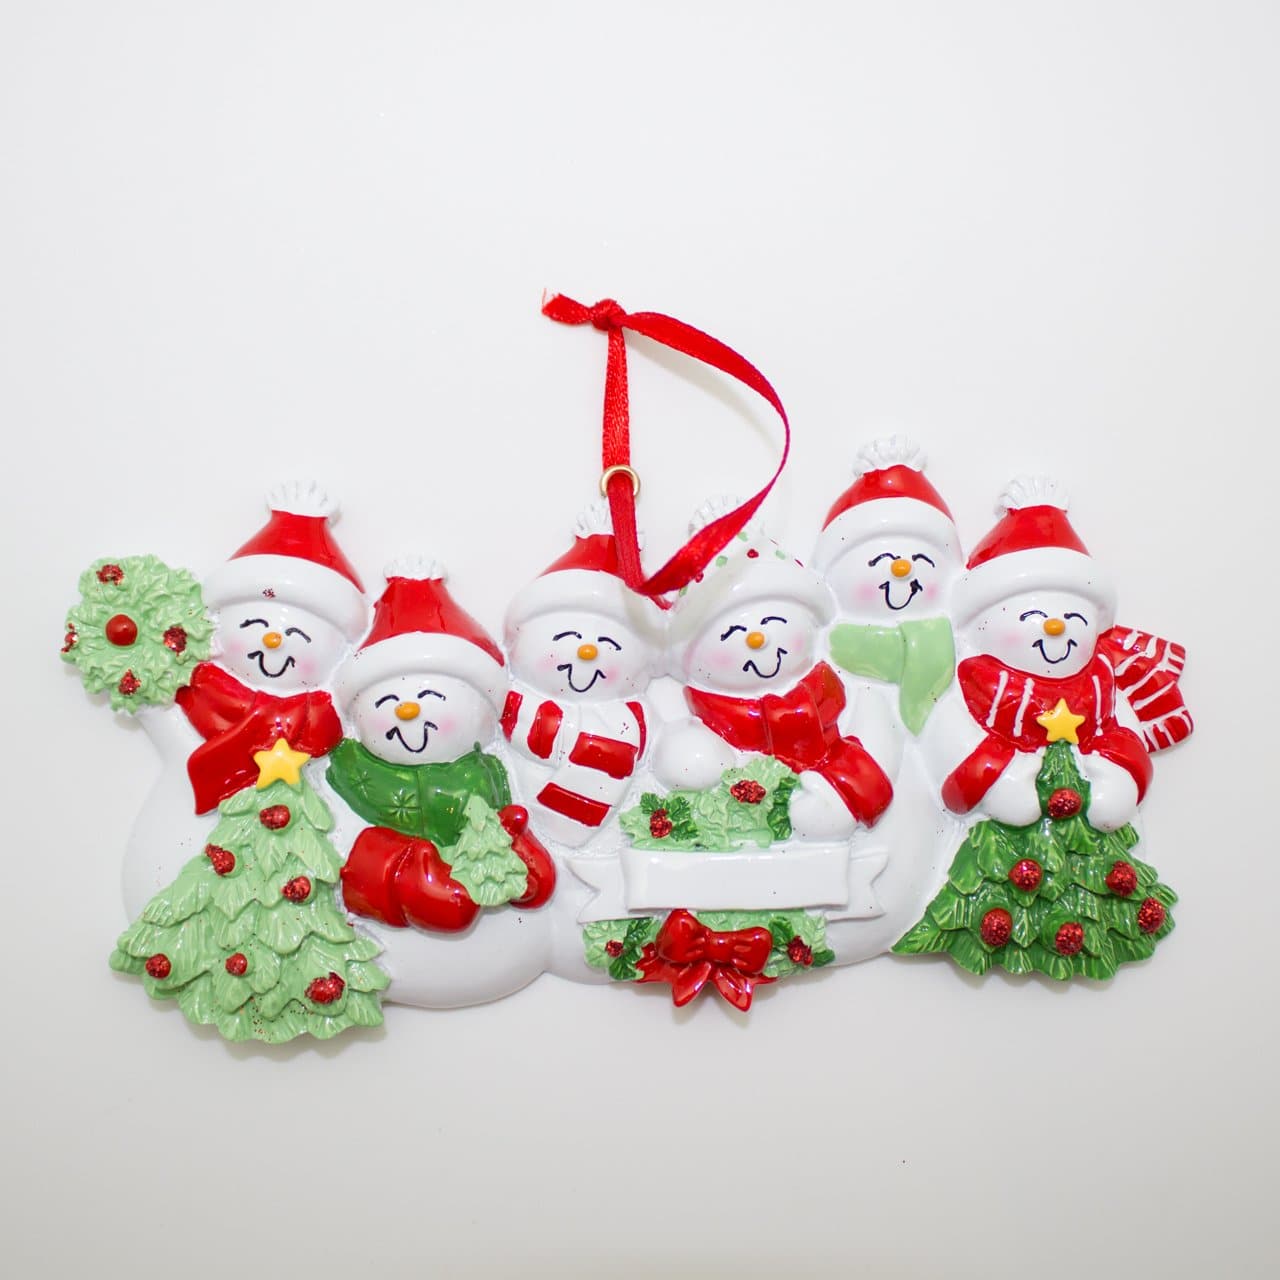 Snowman with Trees - Christmas Ornament (Suitable for Personalization)